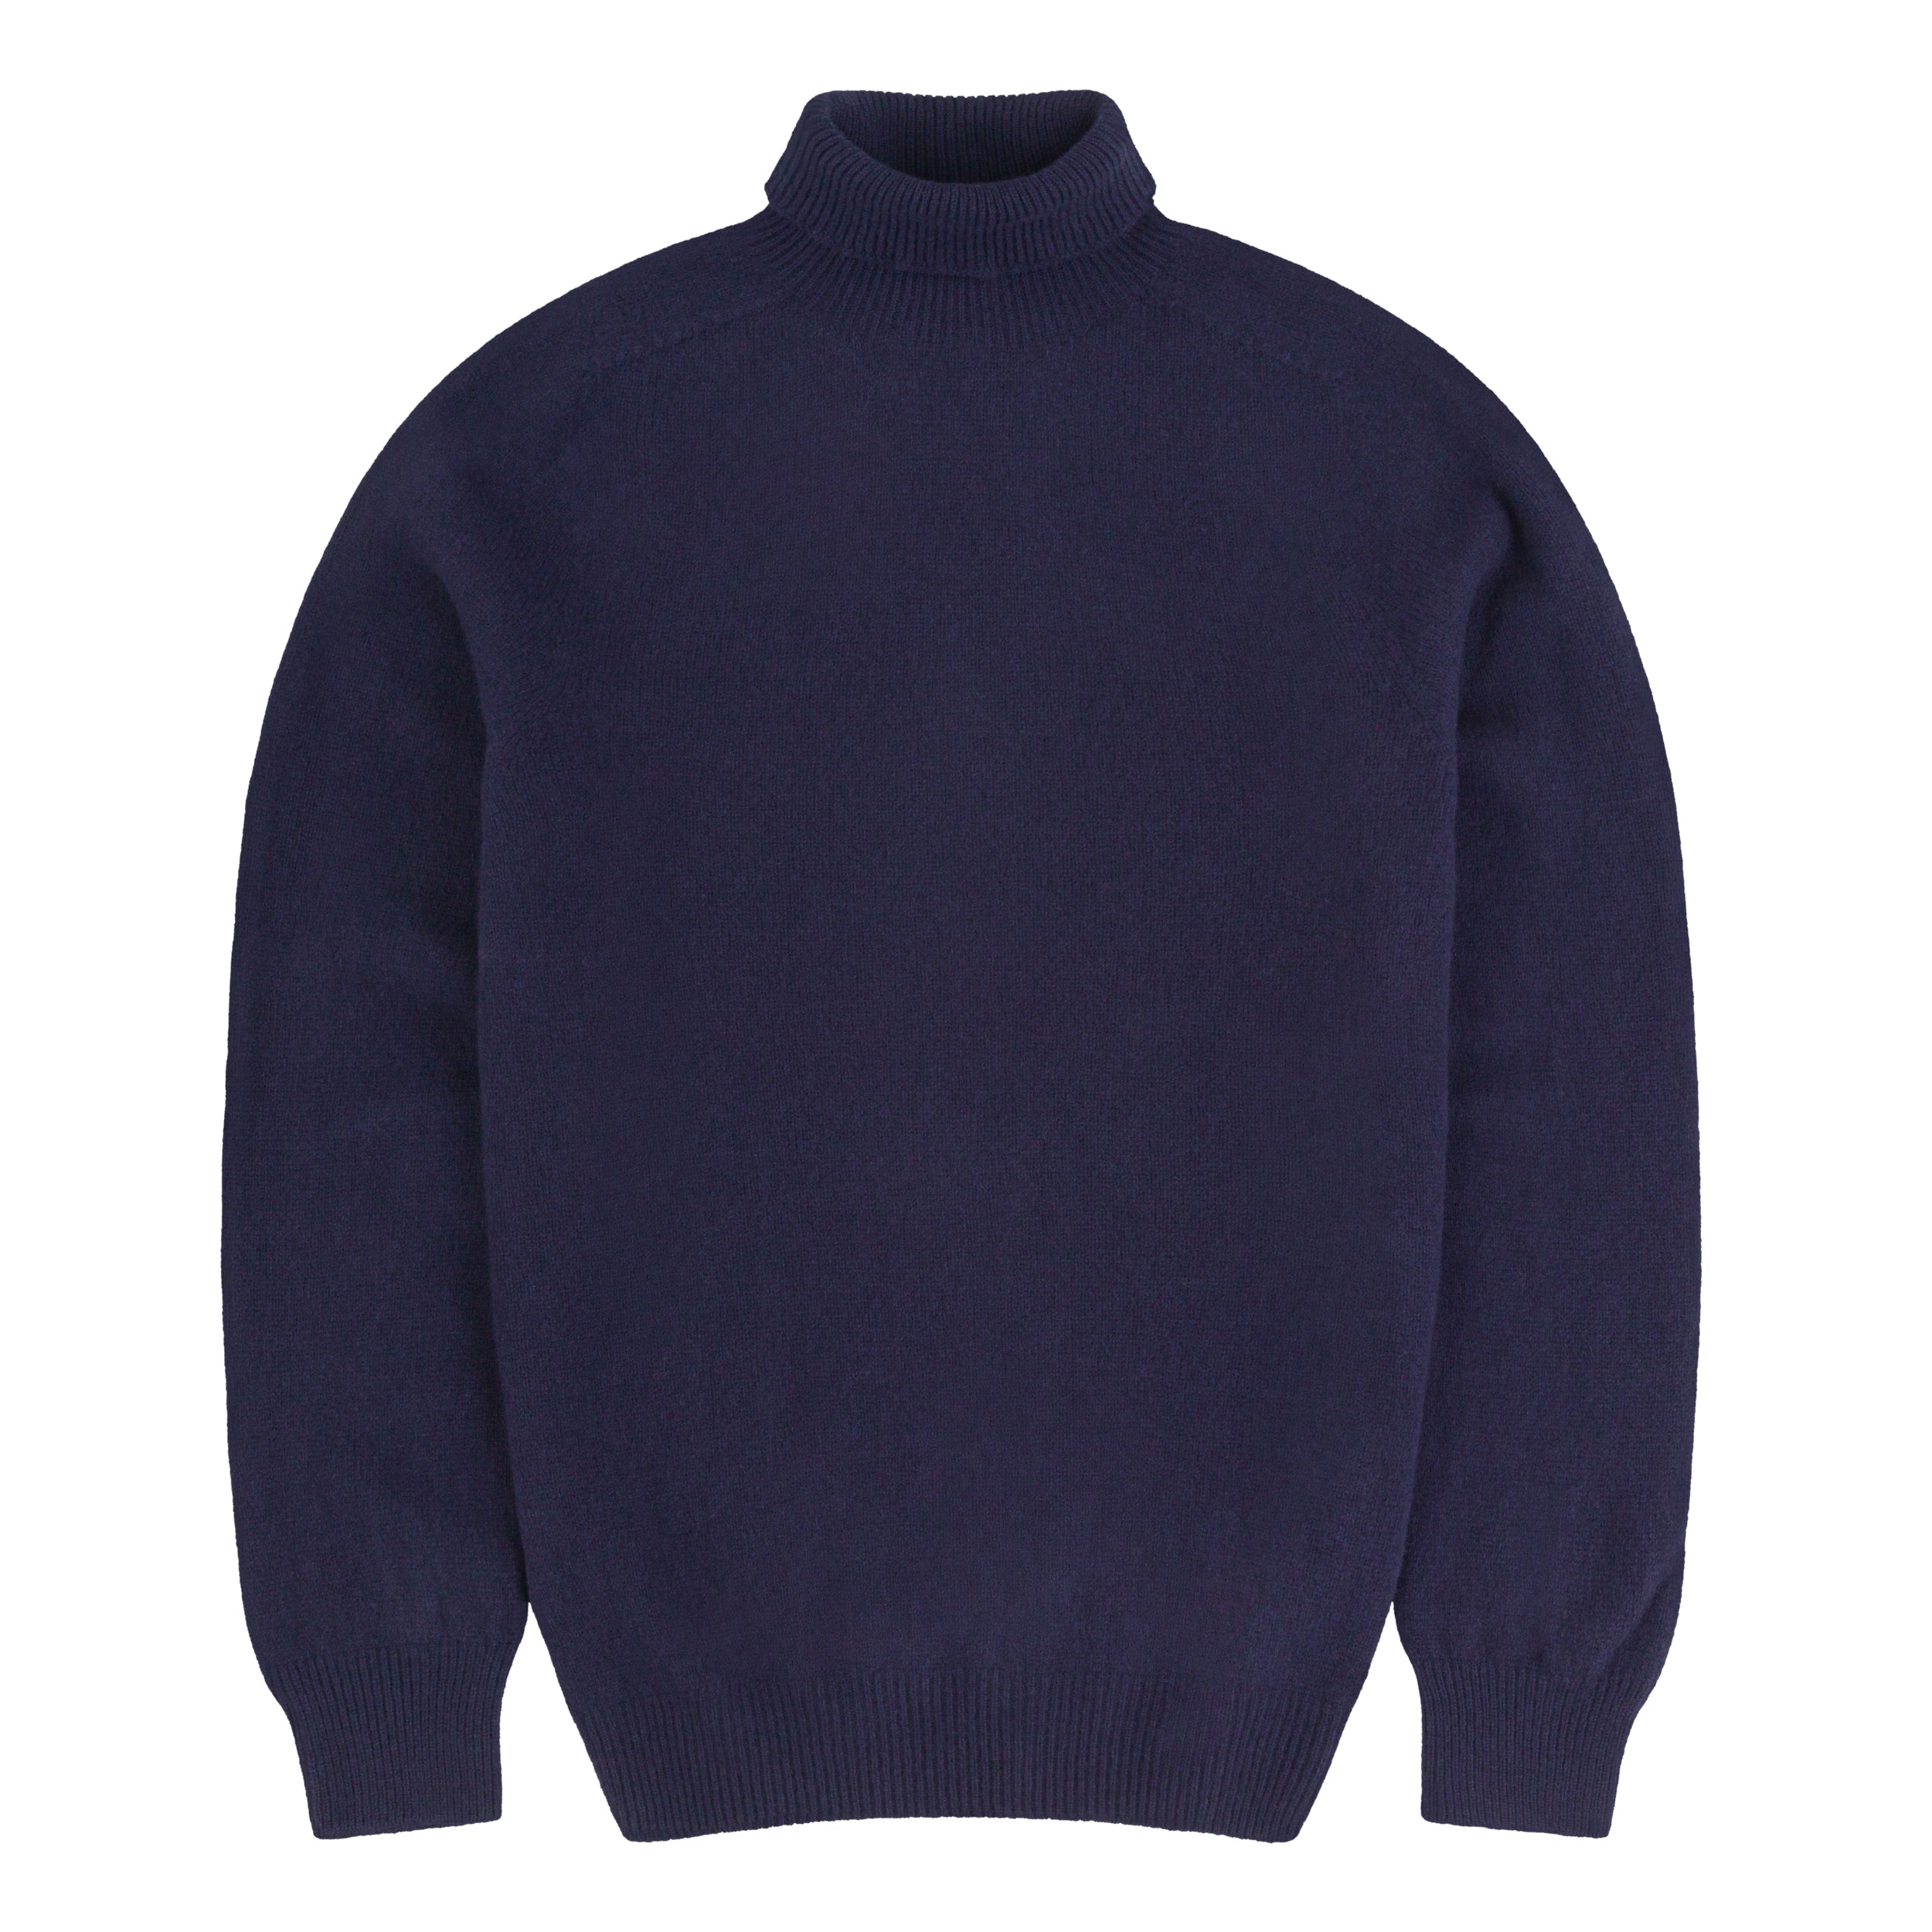 Carrier Company Cashmere and Merino Supersoft Roll Neck Jumper in Navy